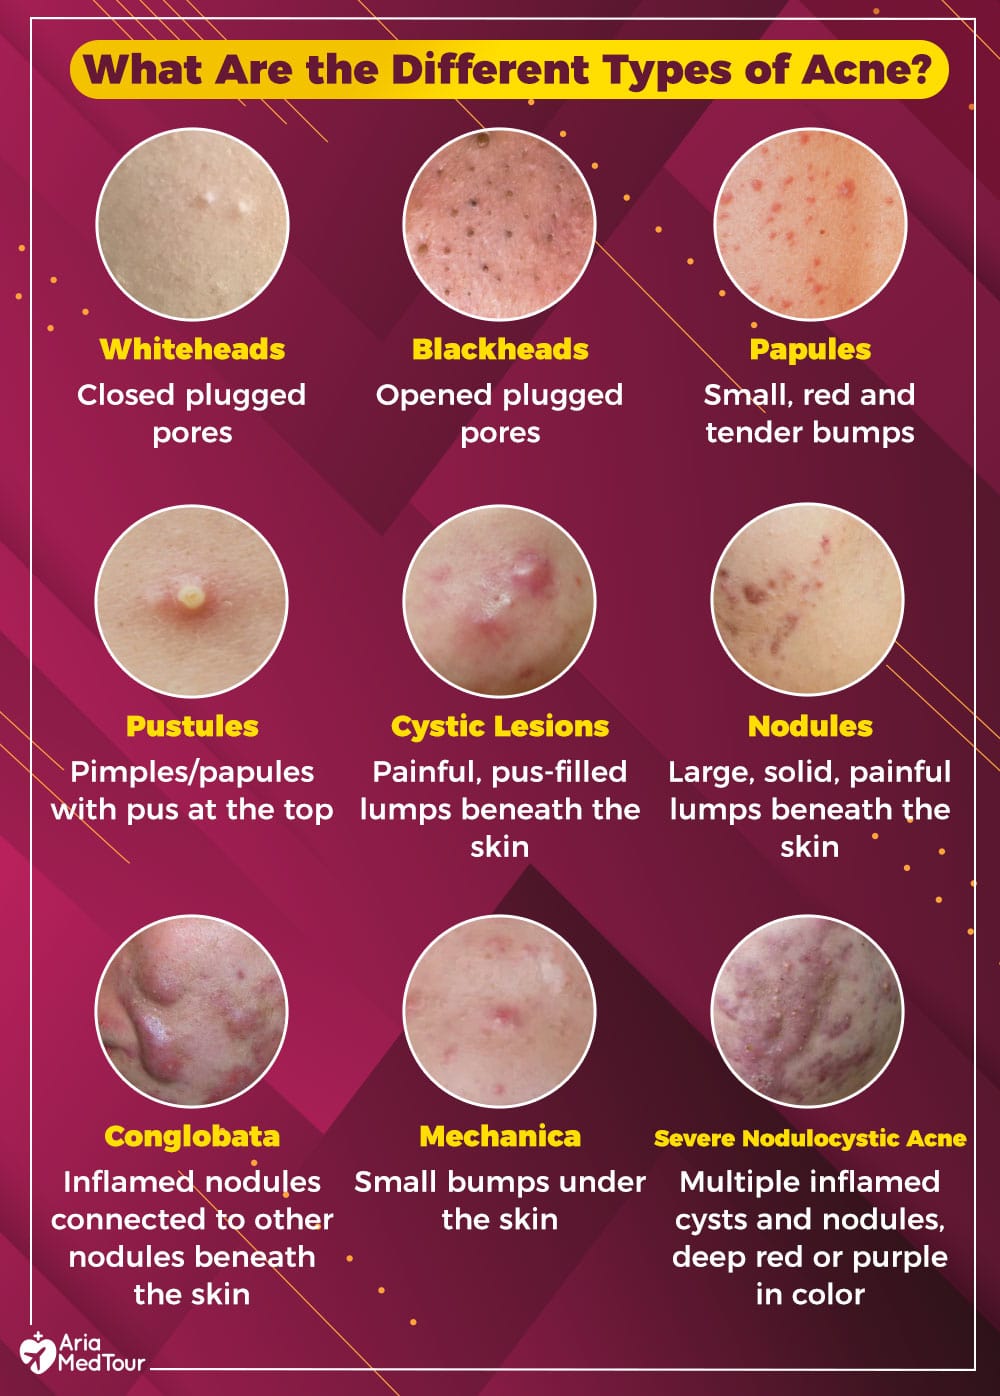 Types of acne: what are the different types of acne?